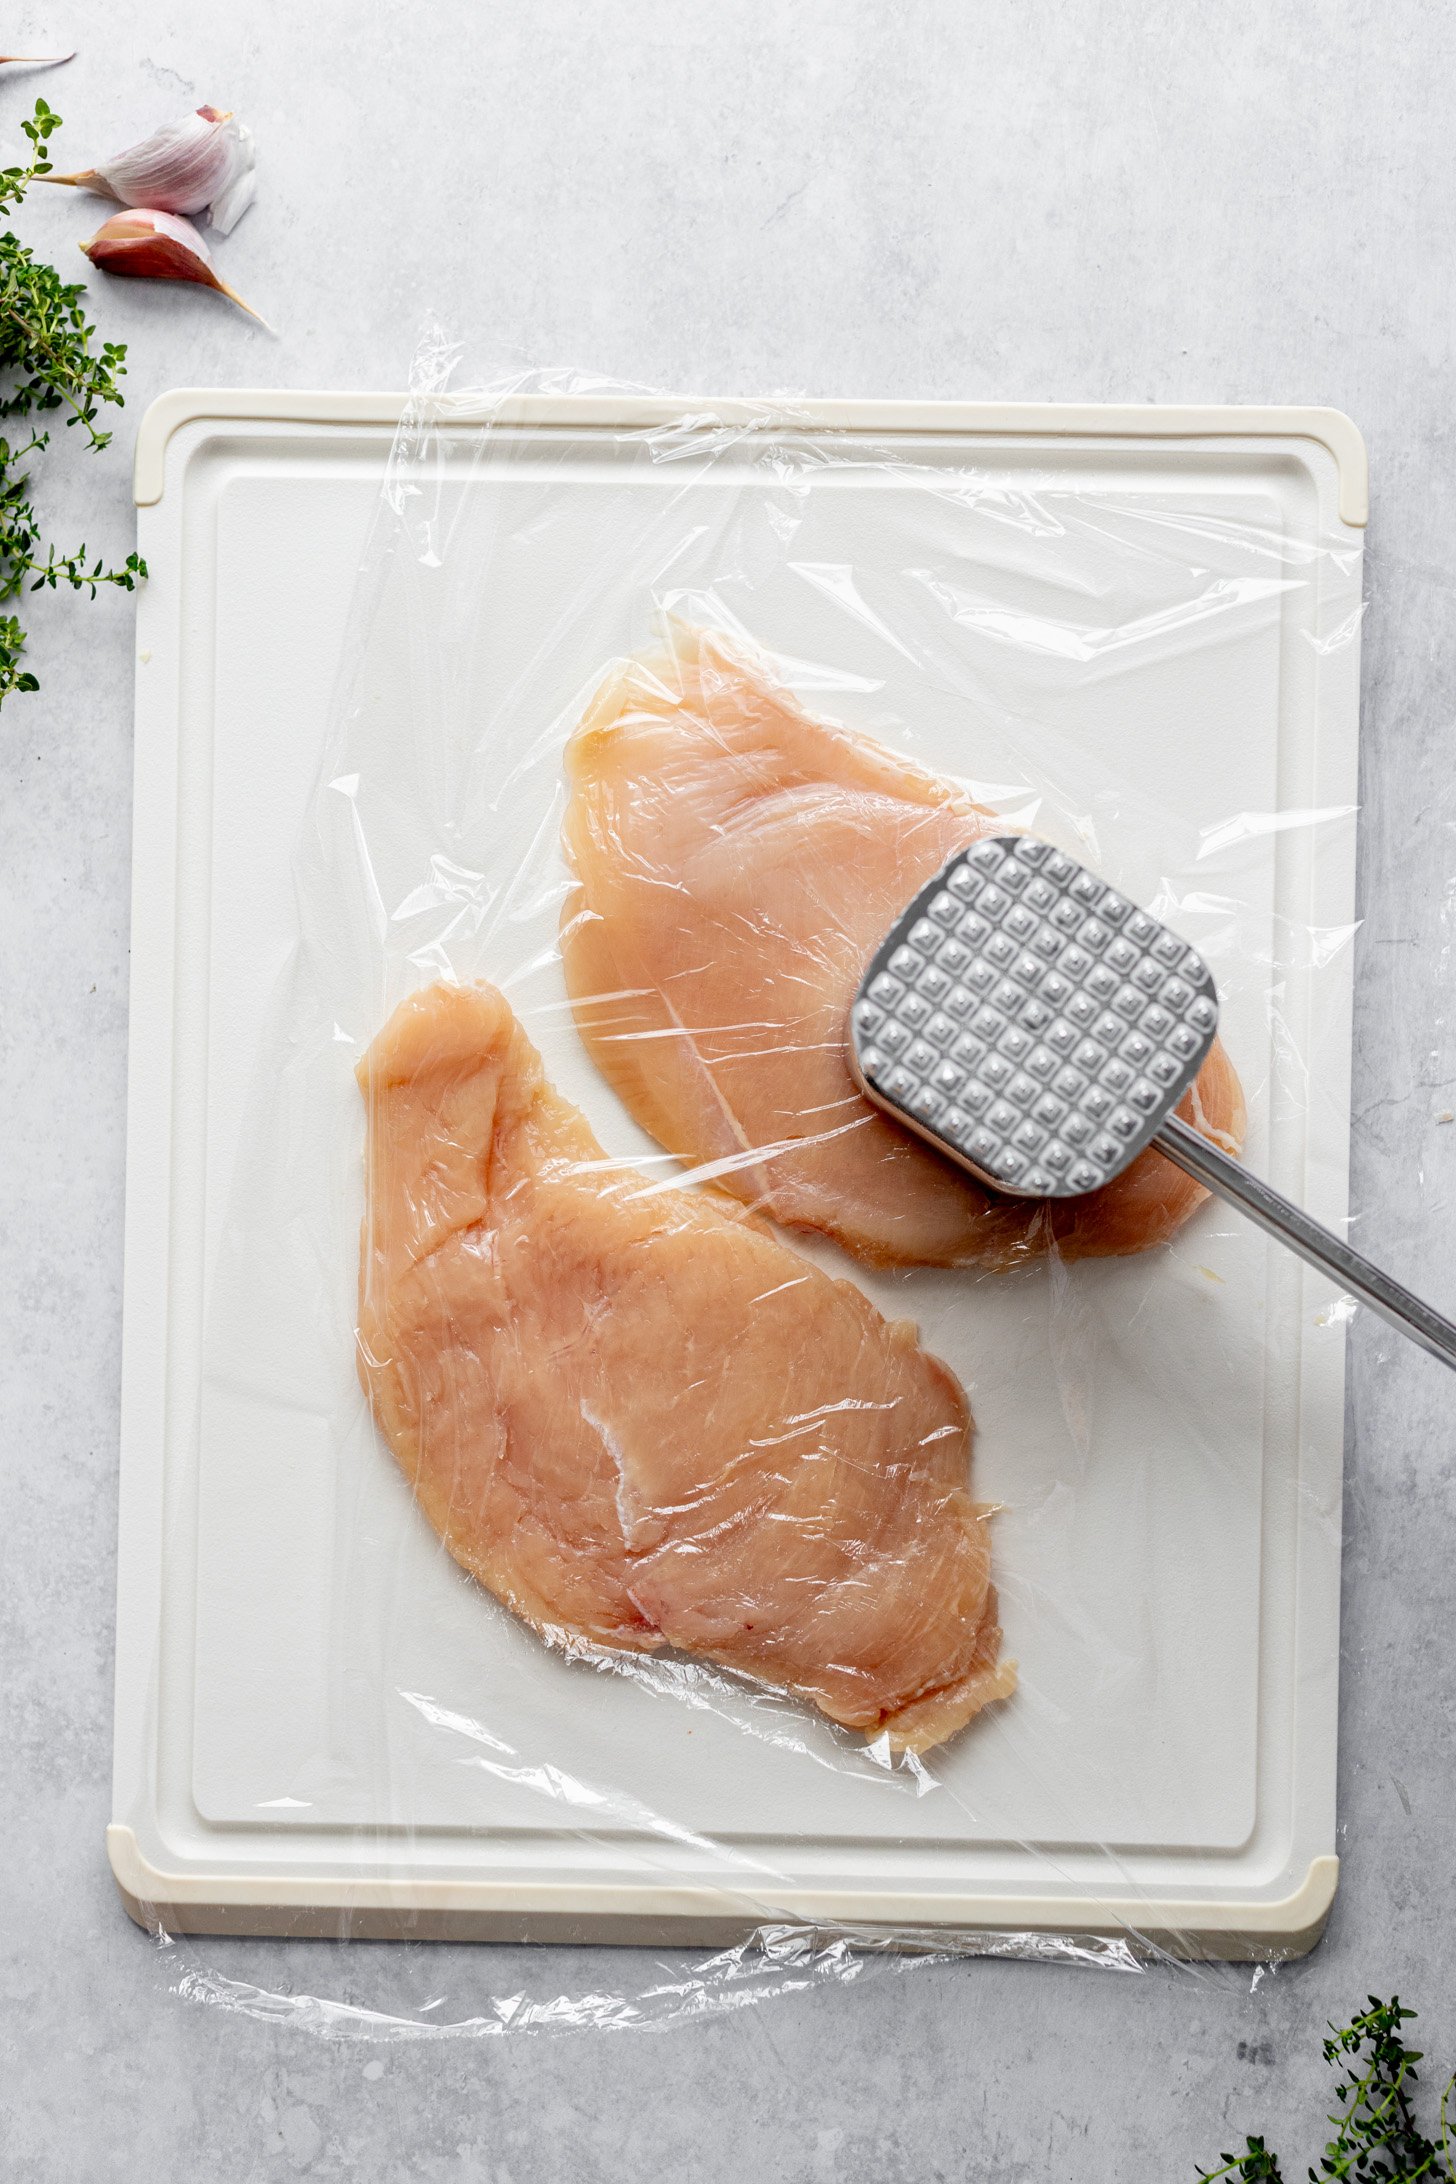 Two chicken breast halves with plastic wrap on top are being pounded flat with a meat tenderizing tool. The chicken breasts are on a cutting board on a counter. The cuttign board is surrounded by a few garlic cloves and fresh herbs.